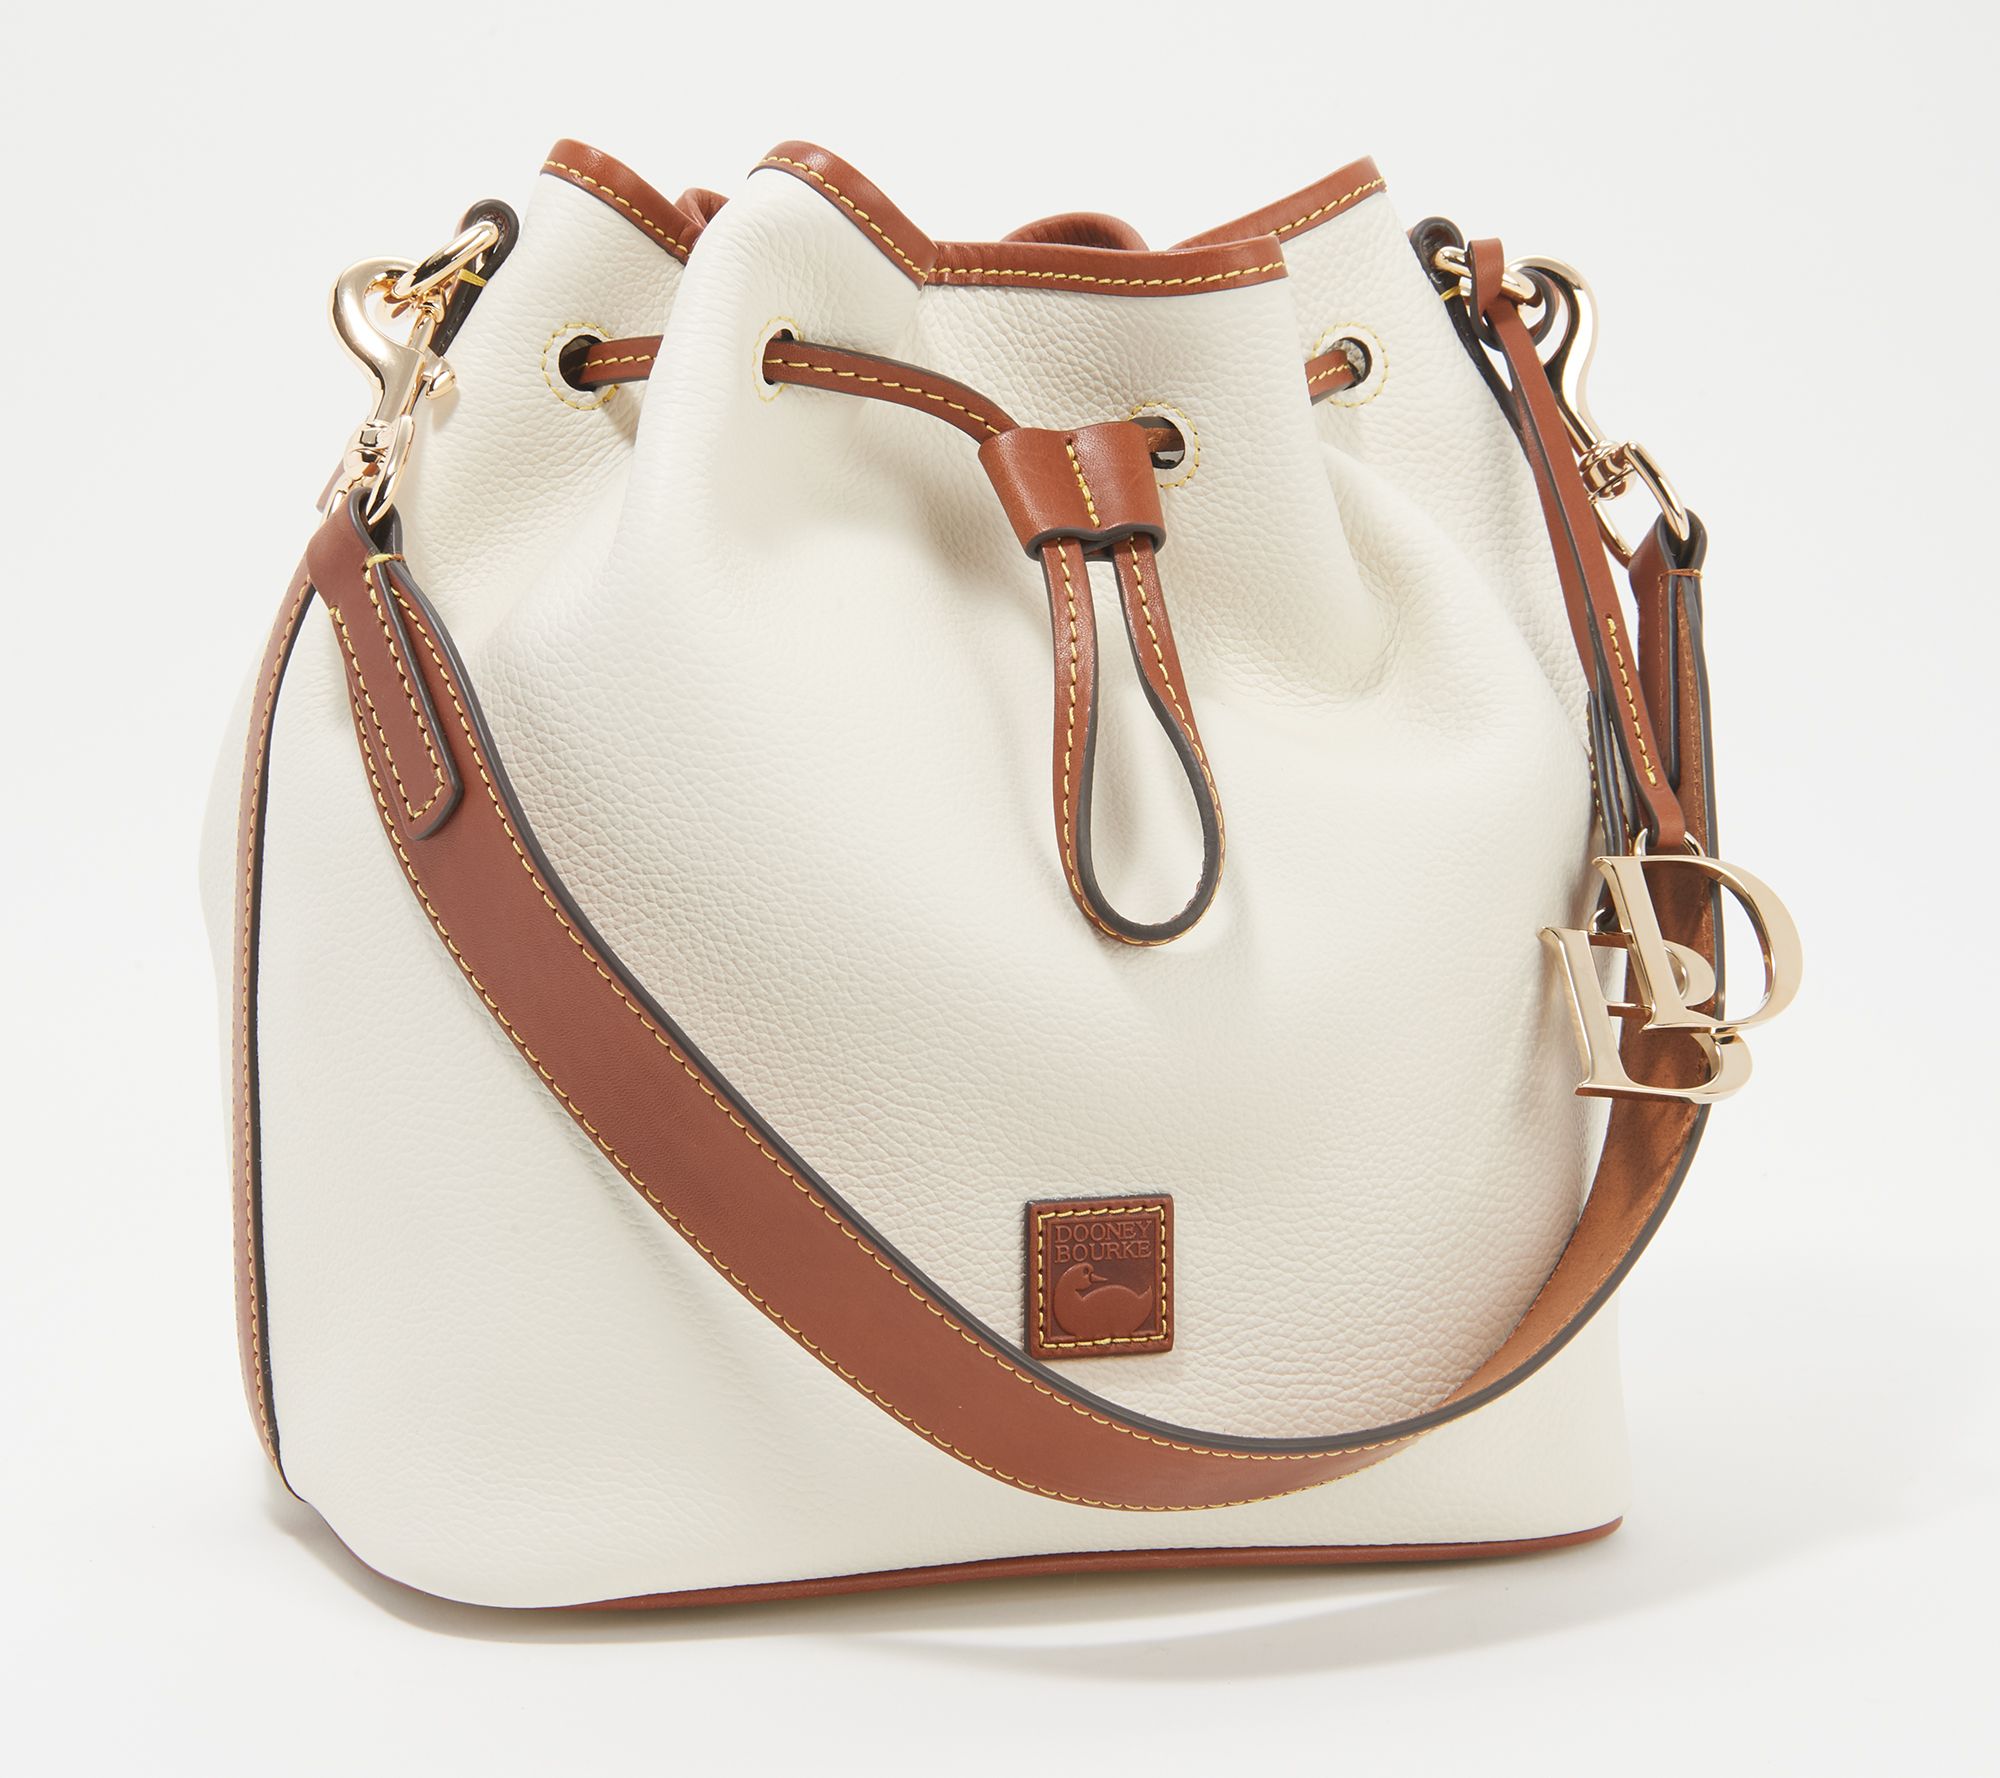 Dooney & Bourke Pebble Leather Serena Drawstring with Pouch on QVC